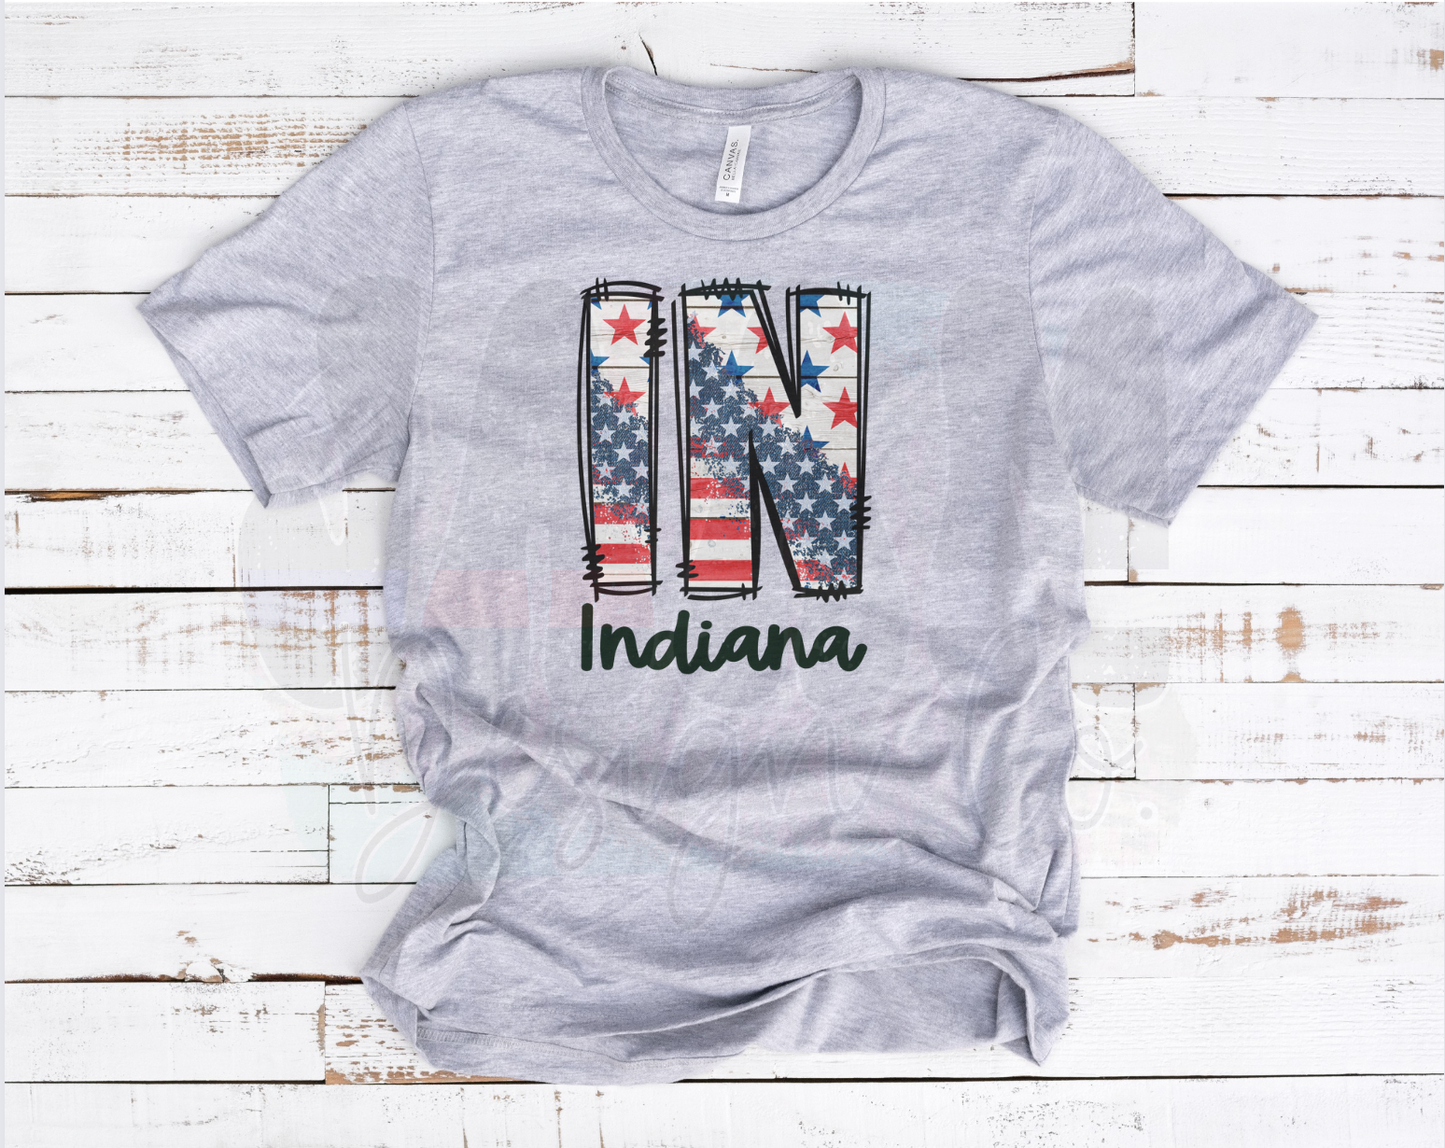 State Red/White/Blue T-Shirt